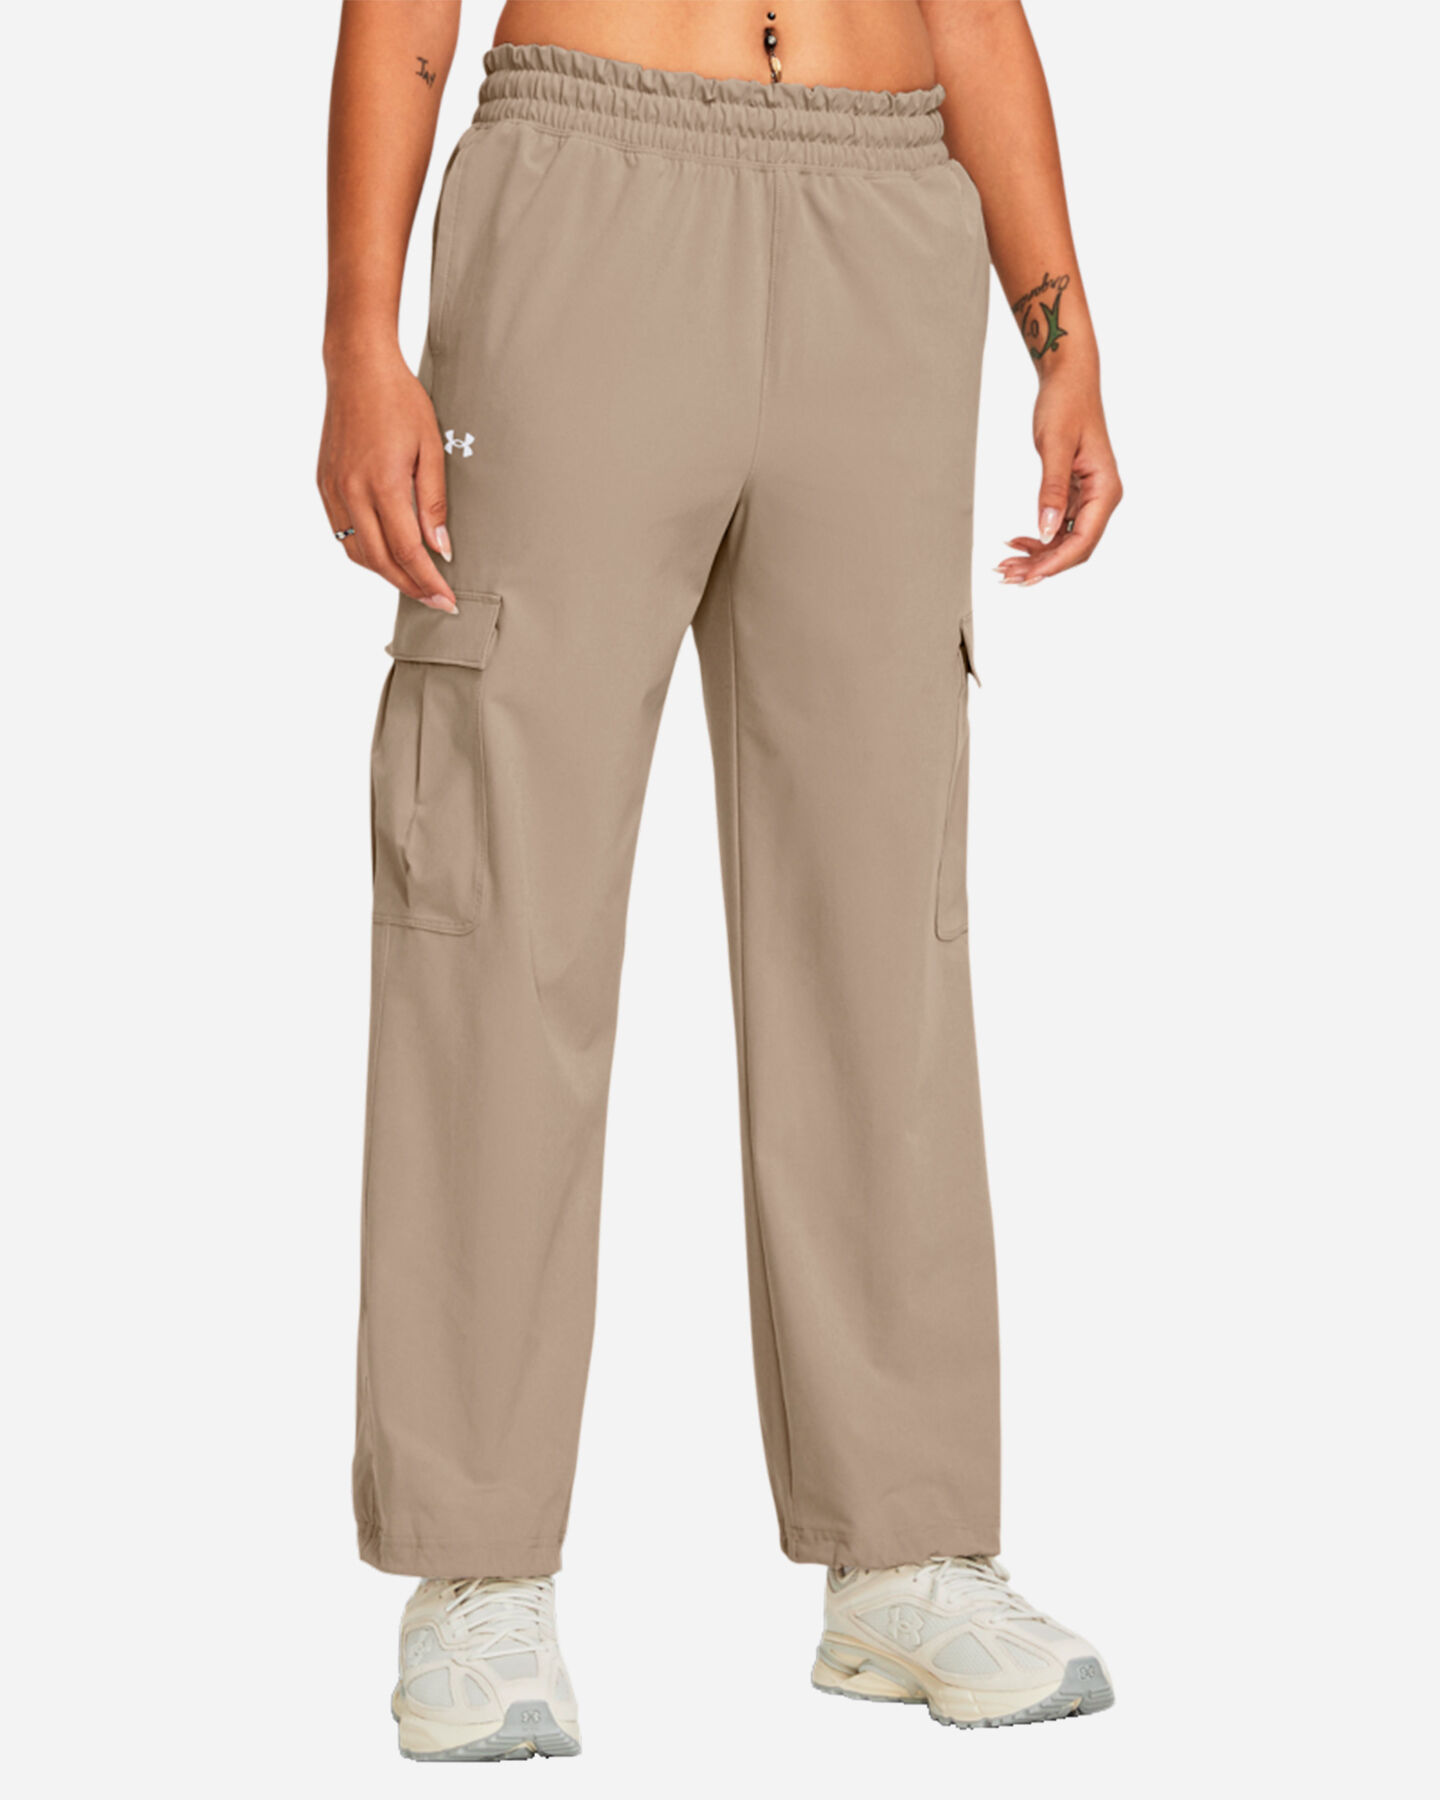  Pantalone UNDER ARMOUR WOVEN CARGO W S5641524|0203|XS scatto 2